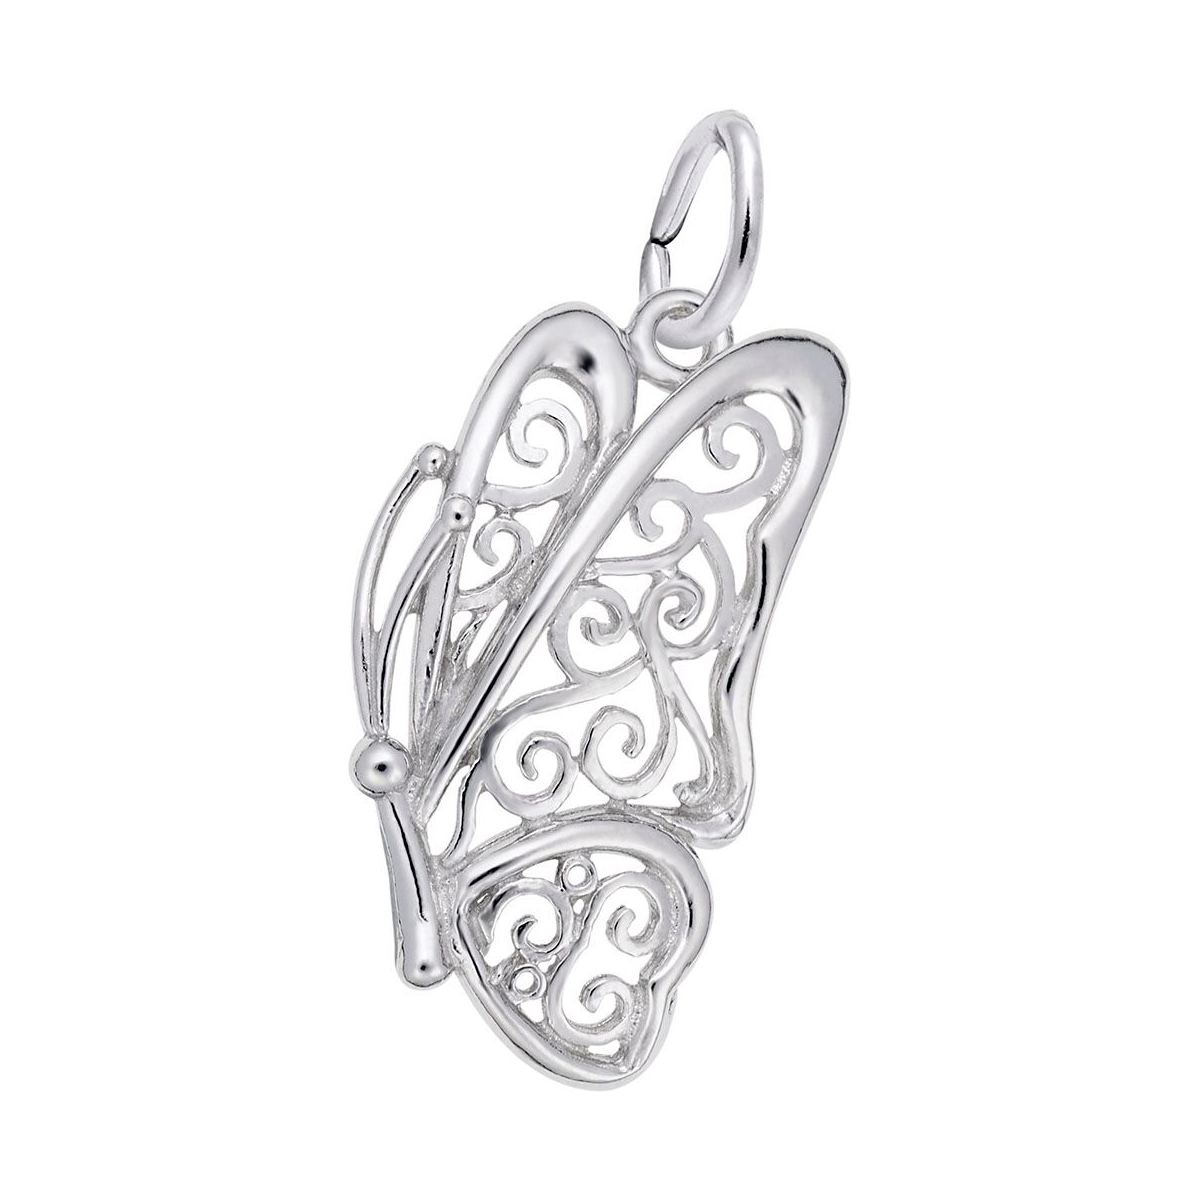 Rembrandt Charms Butterfly Charm in Sterling Silver | 3763-0-SS | Borsheims